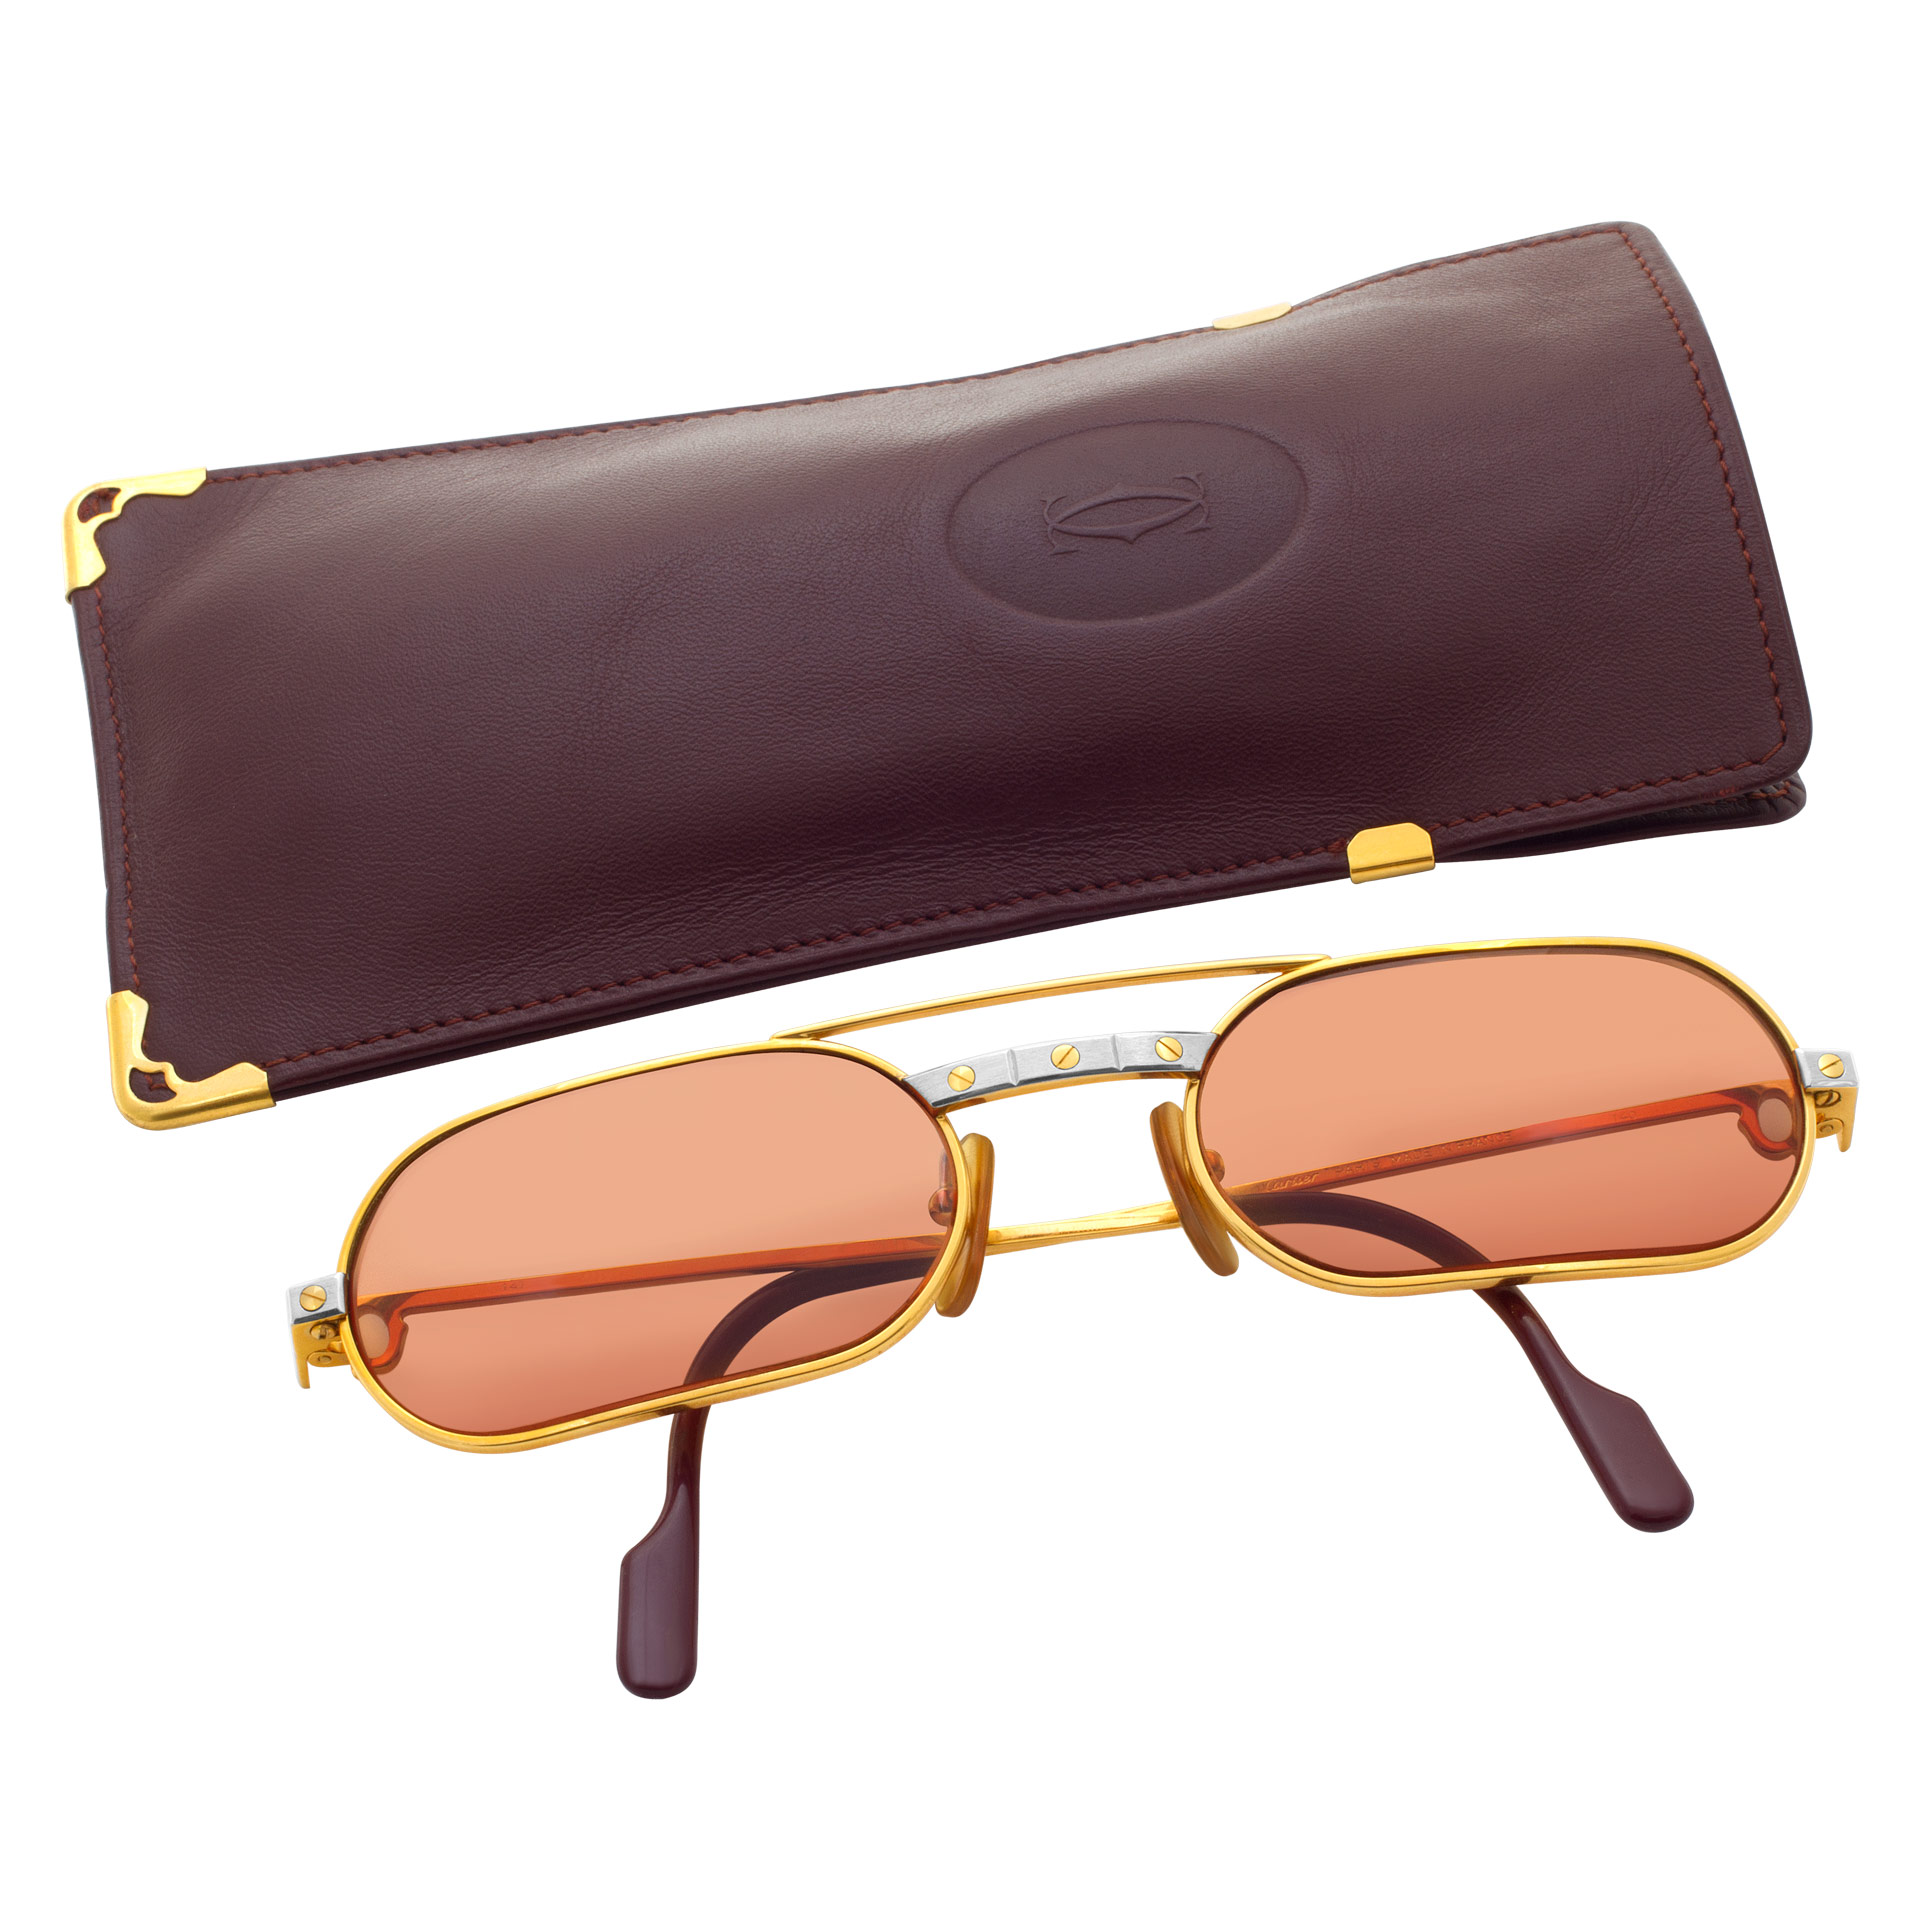 Cartier Santos glasses in gold plate image 2